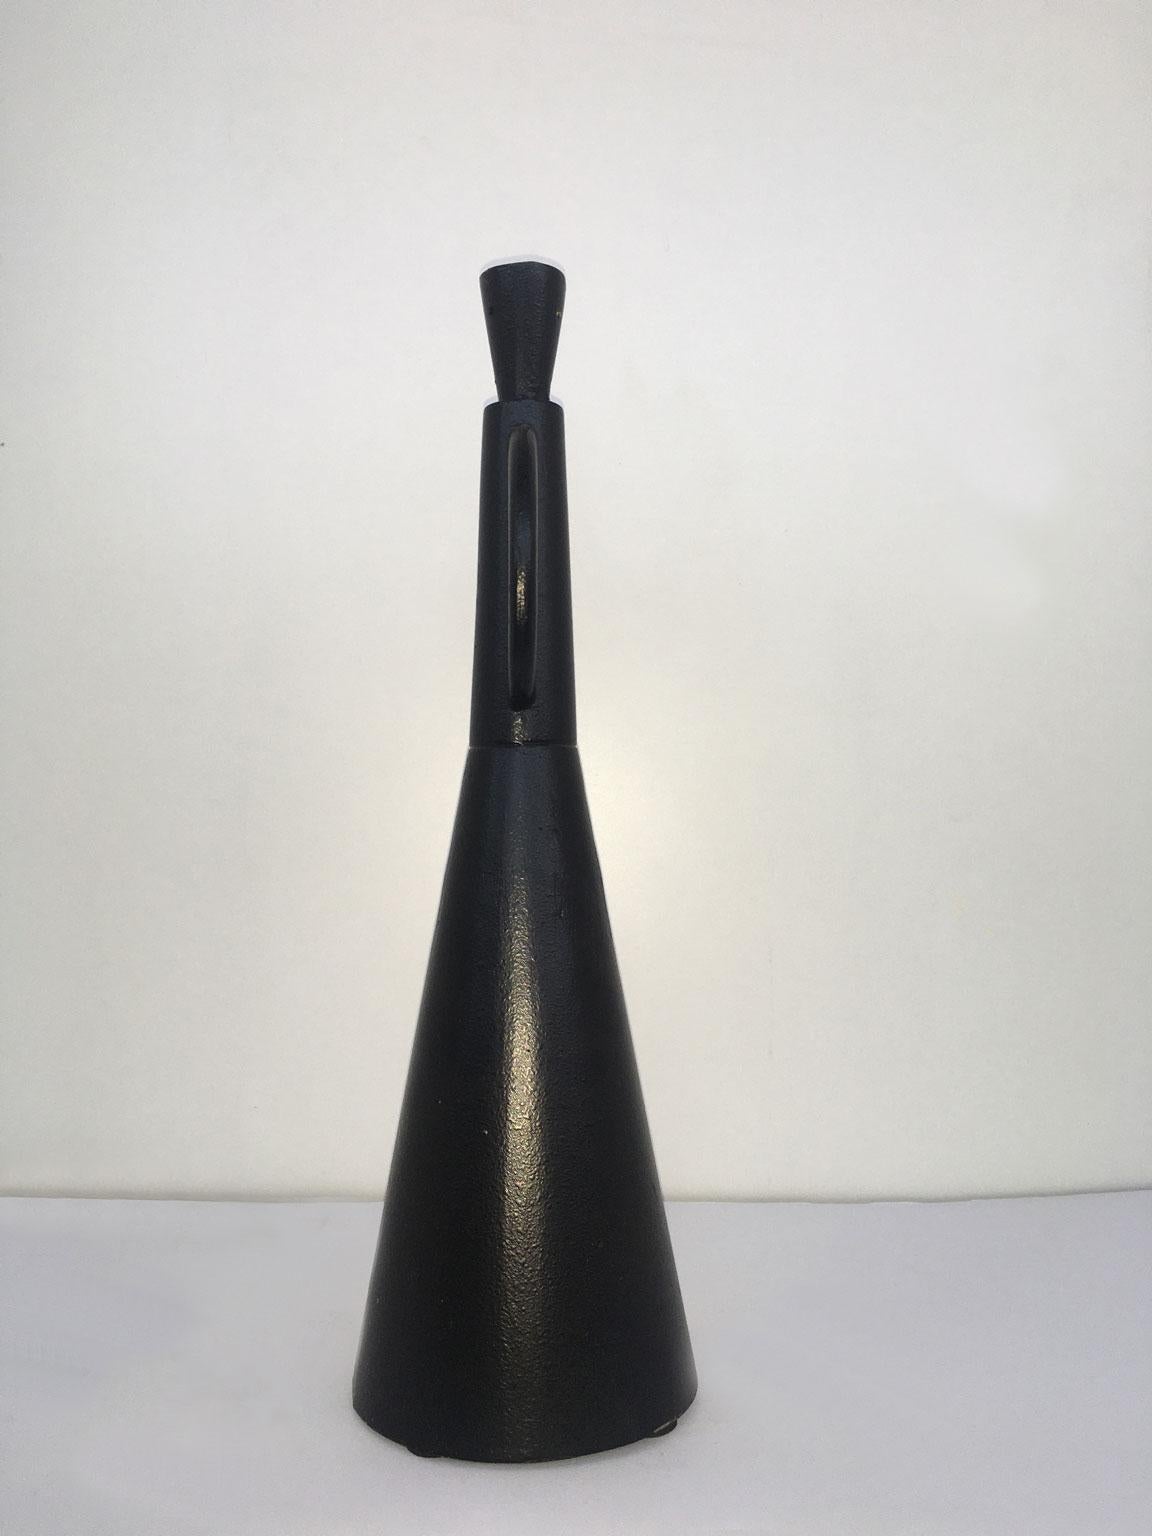 1980 Italy Post-Modern Alessandro Guerriero Abstract Sculpture Portabuono Quo For Sale 13